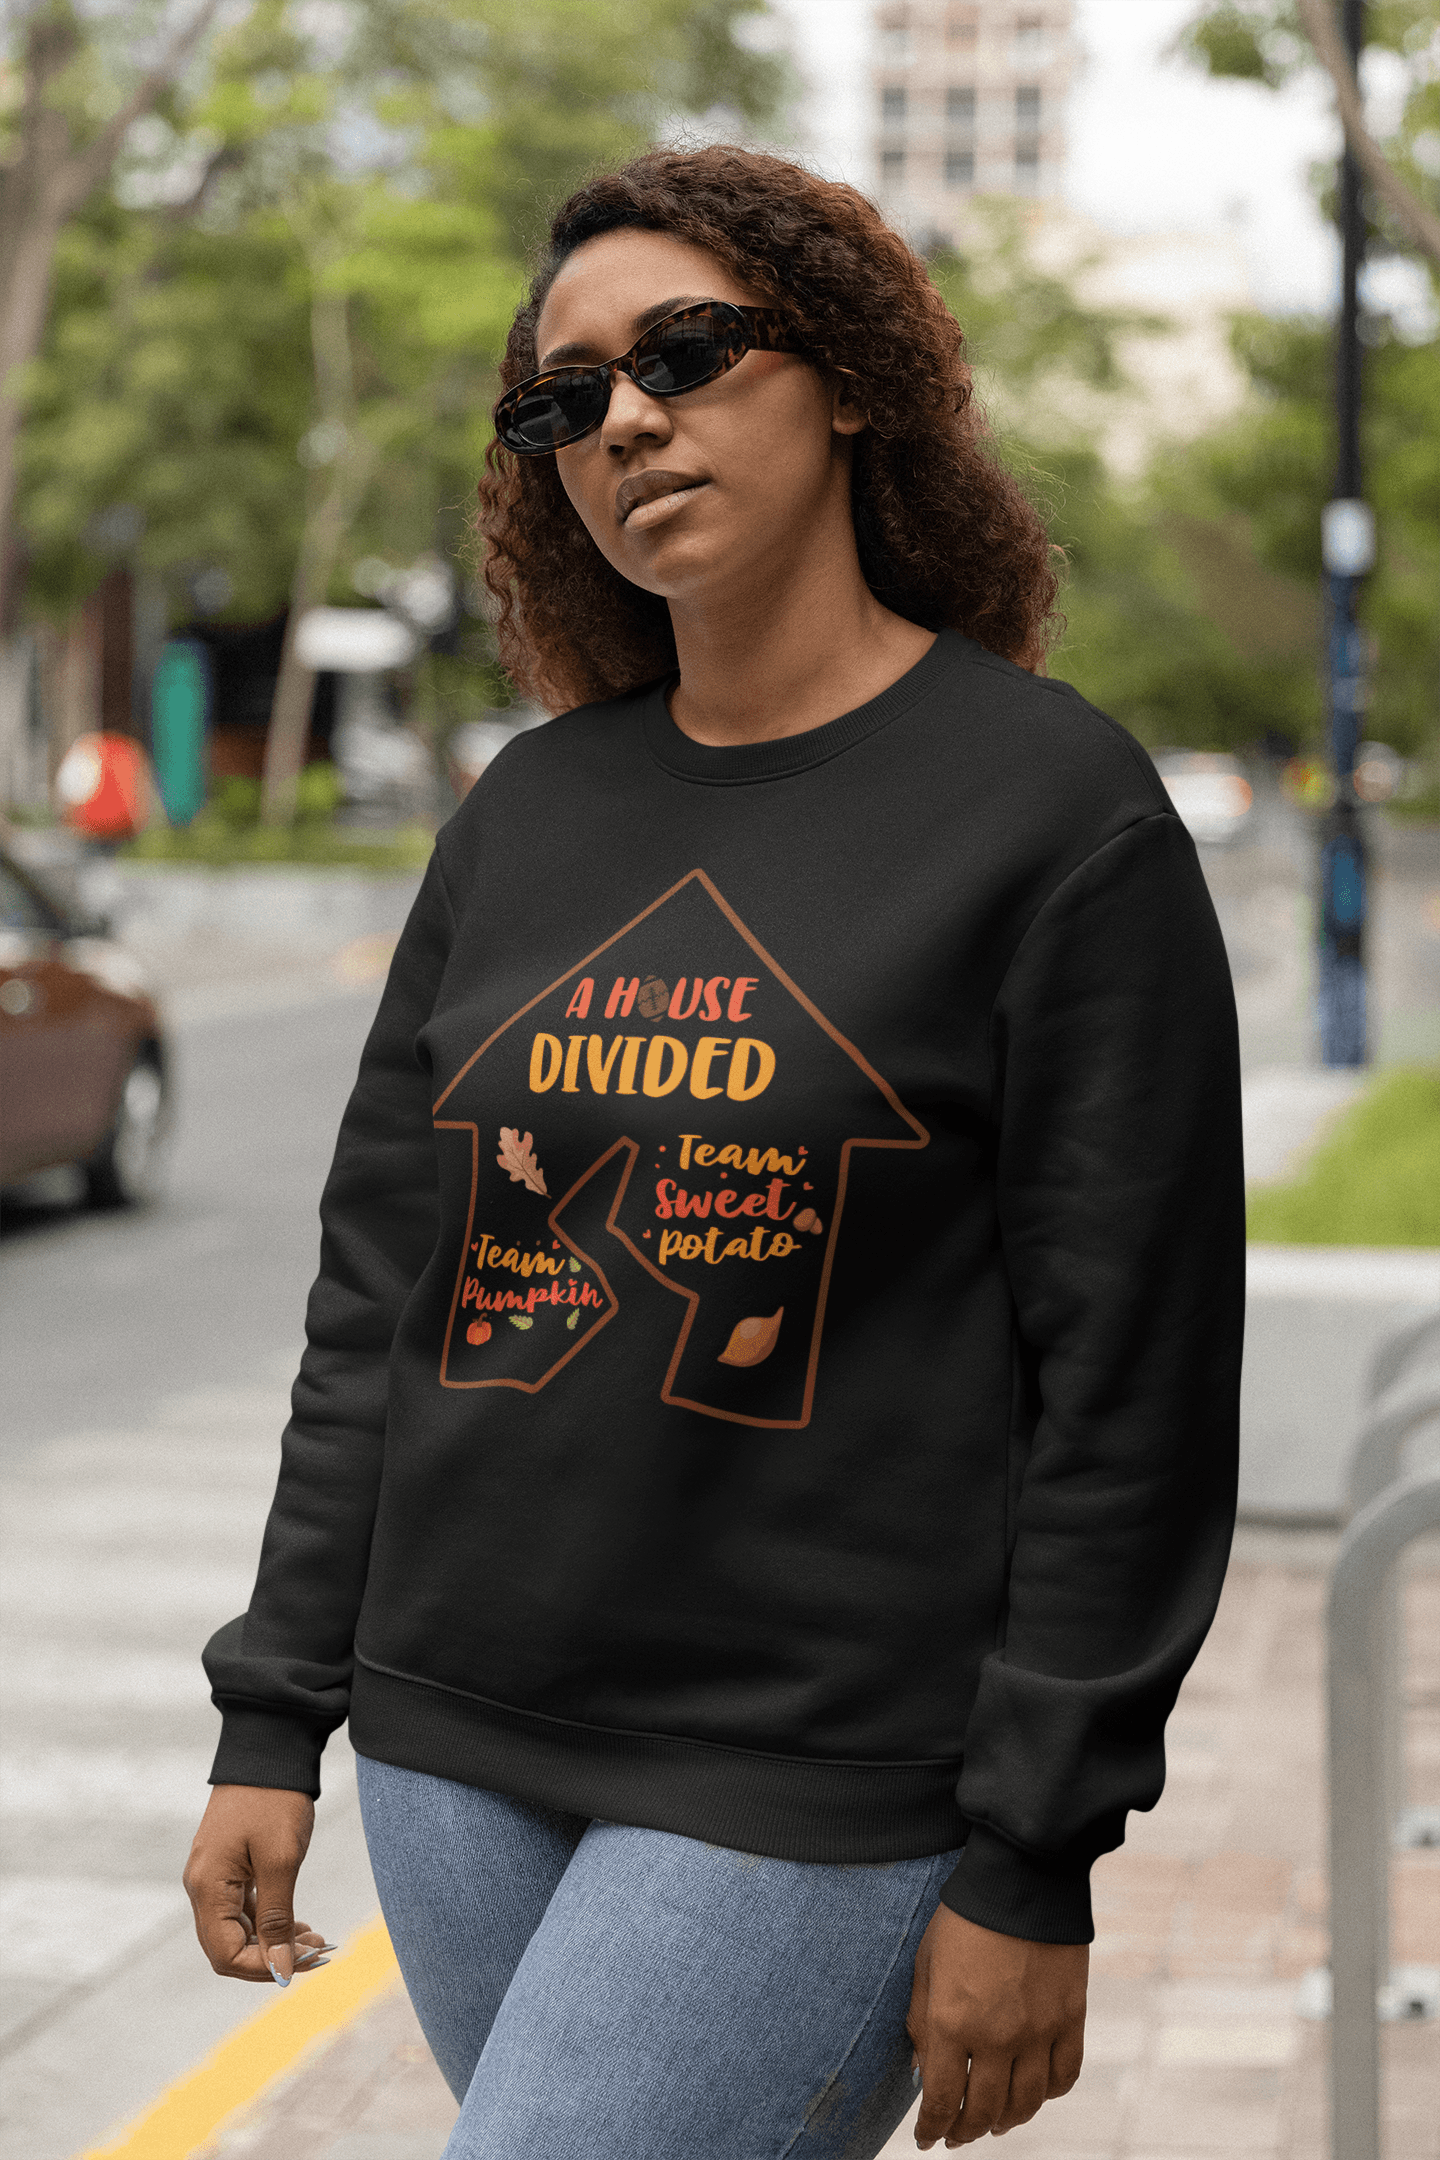 A House Divided Sweatshirt - Sharp Tact Kreativ | Tees & Gifts with Encouraging Messages to Brighten Your Day with a Bit of Wit